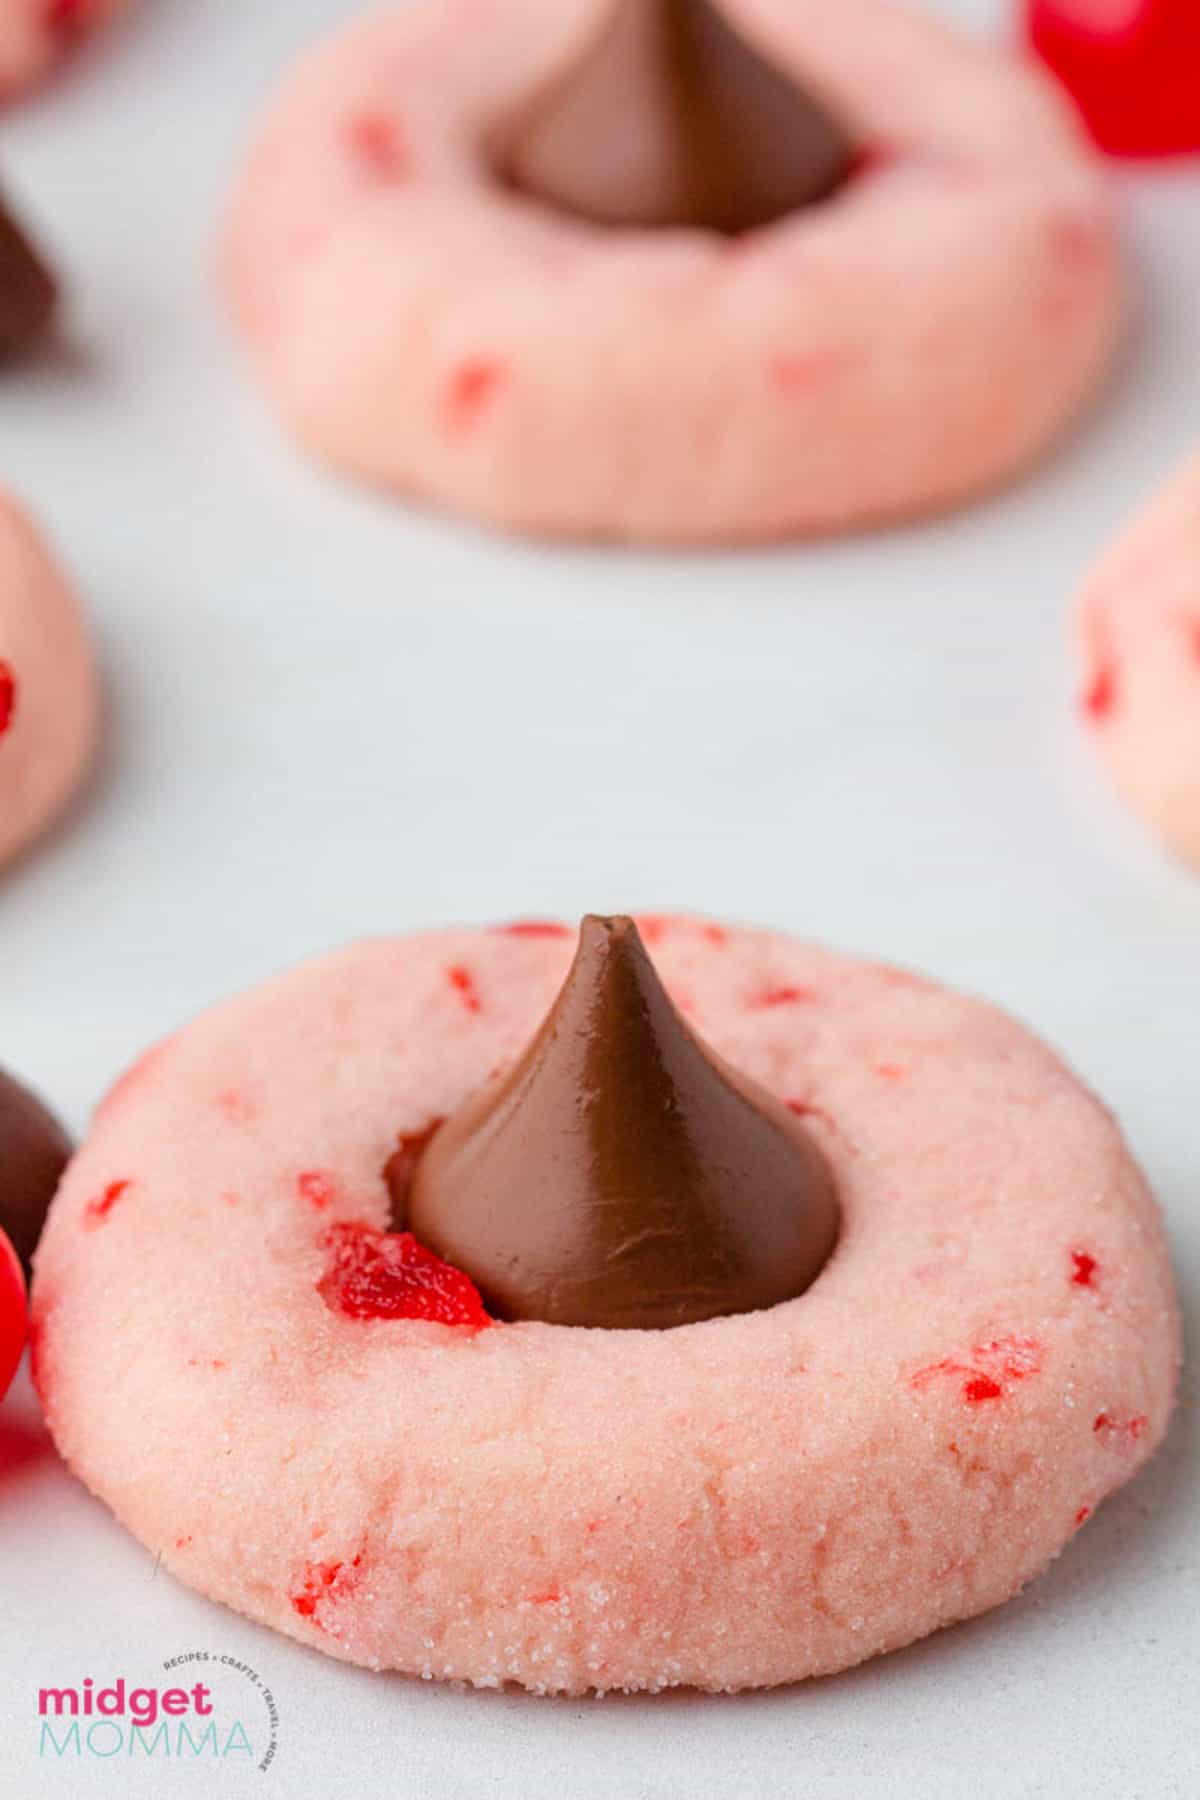 A cherry cookies with a chocolate kiss on top.